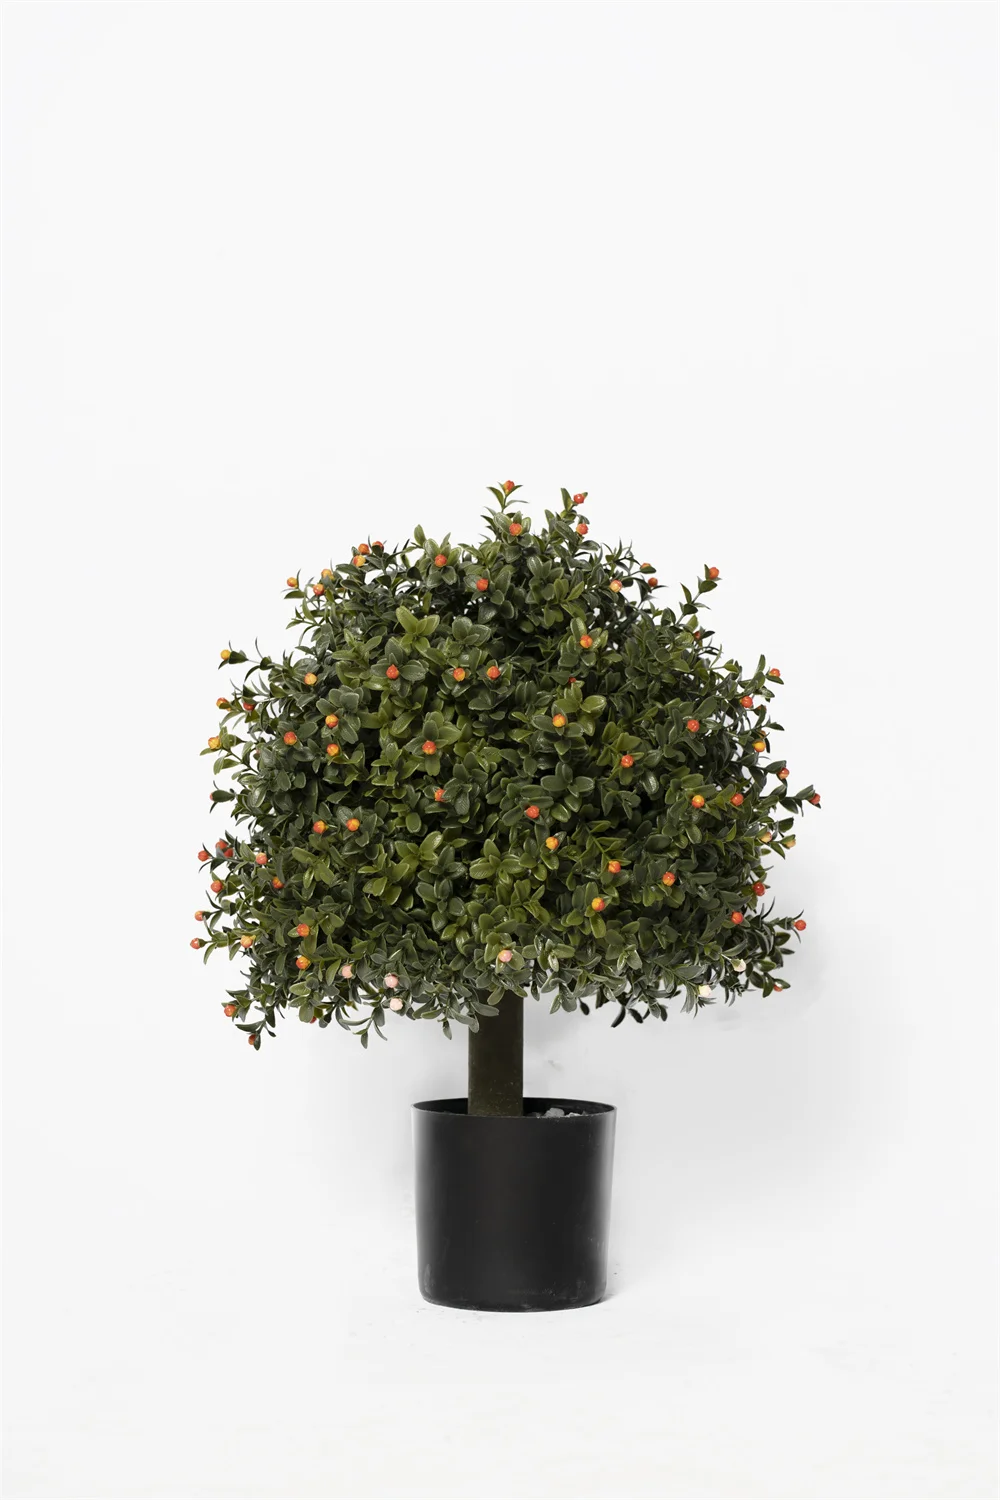 Factory Directly Good Quality 45cm Artificial Ivy Hedge Greenery- Potted plants with white pods